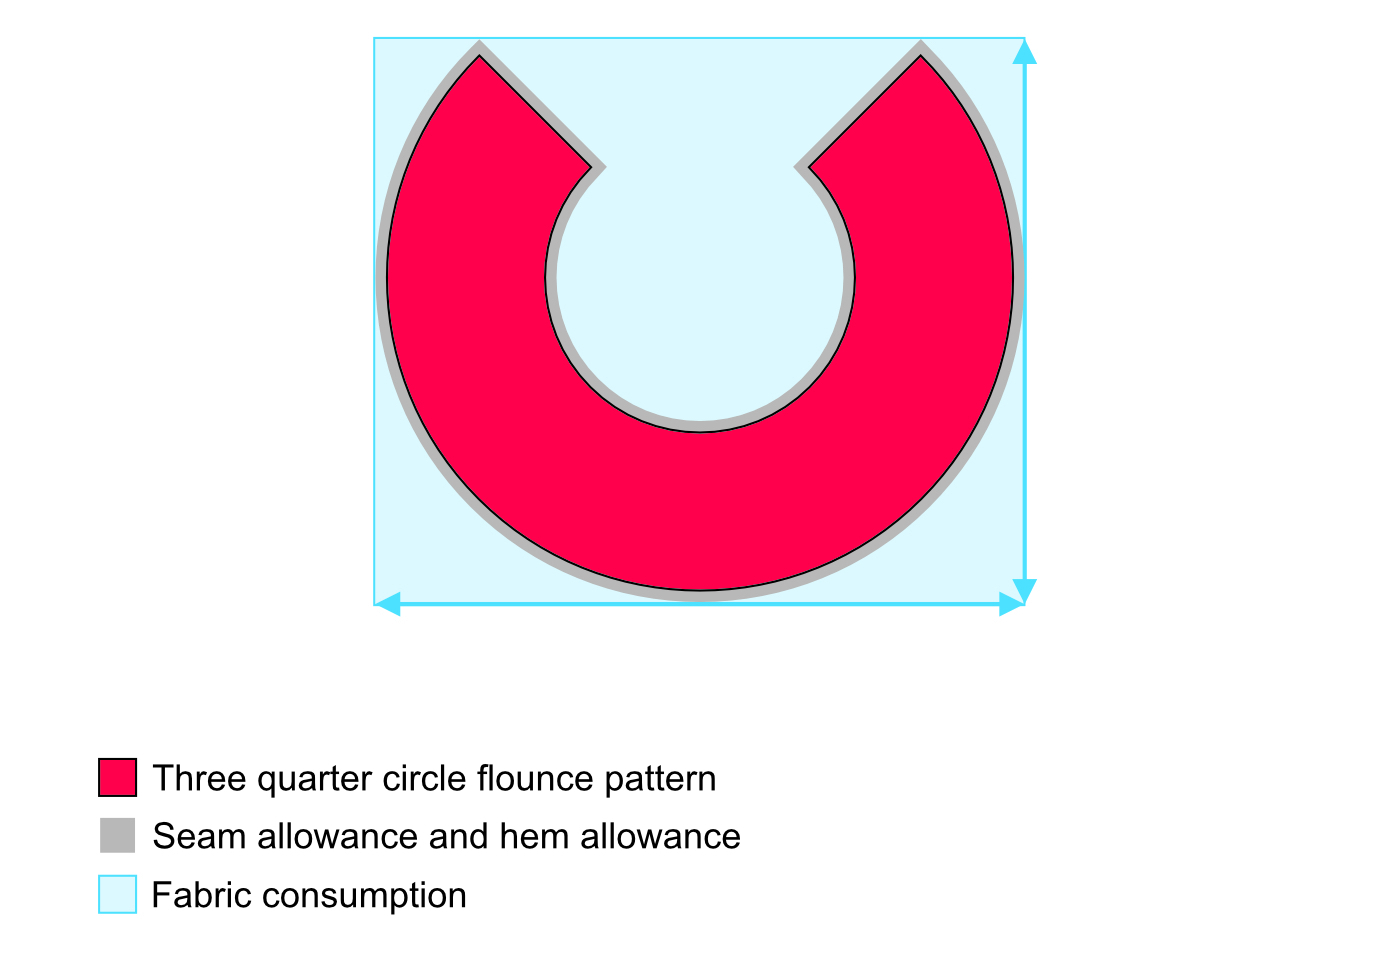 Approximate consumption of fabric for three quarter-circle-skirt-pattern-single circle skirt patterns.